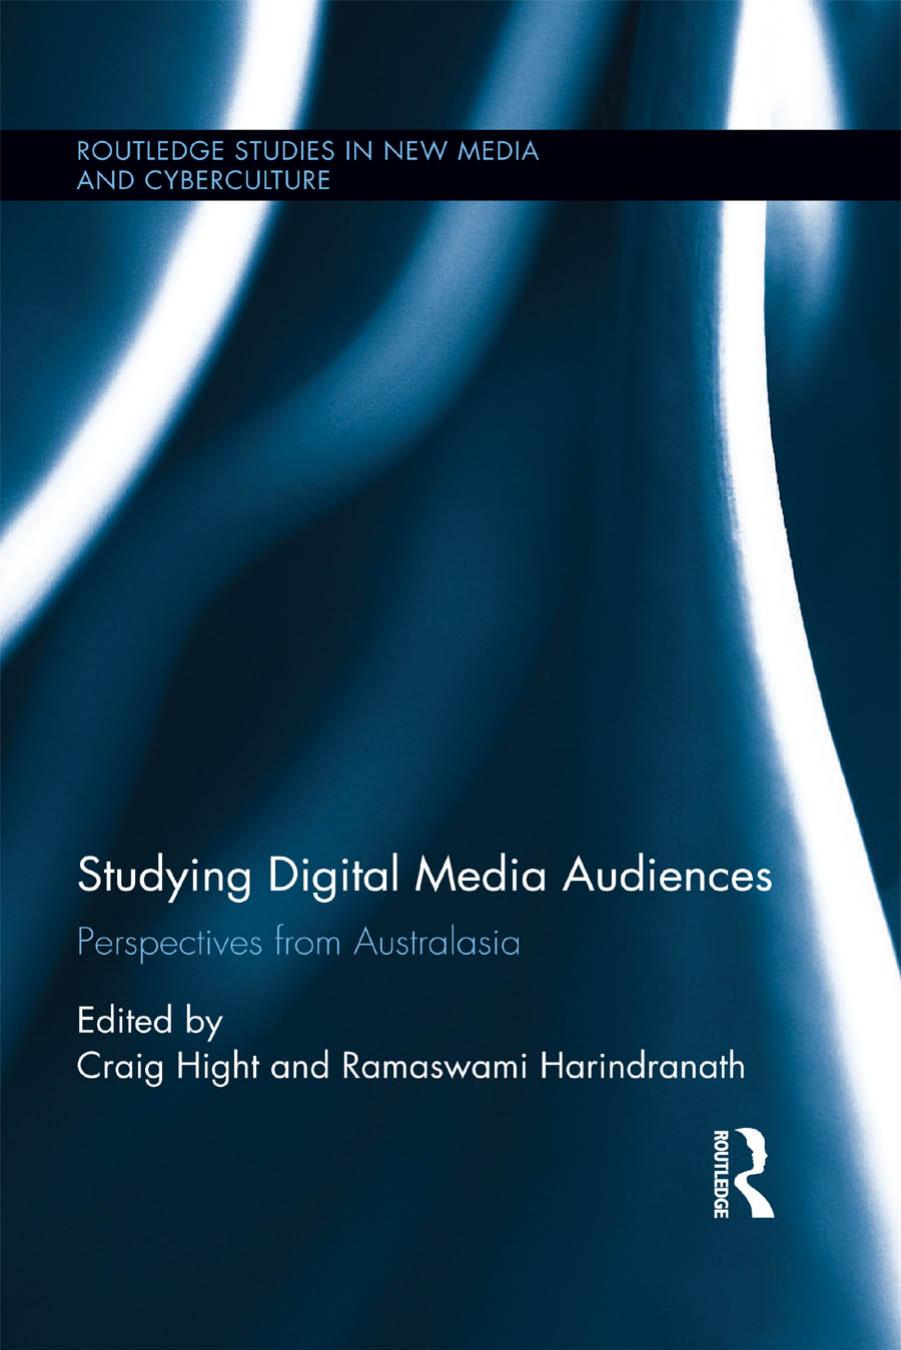 (eBook PDF)Studying Digital Media Audiences: Perspectives from Australasia by Craig Hight,Ramaswami Harindranath